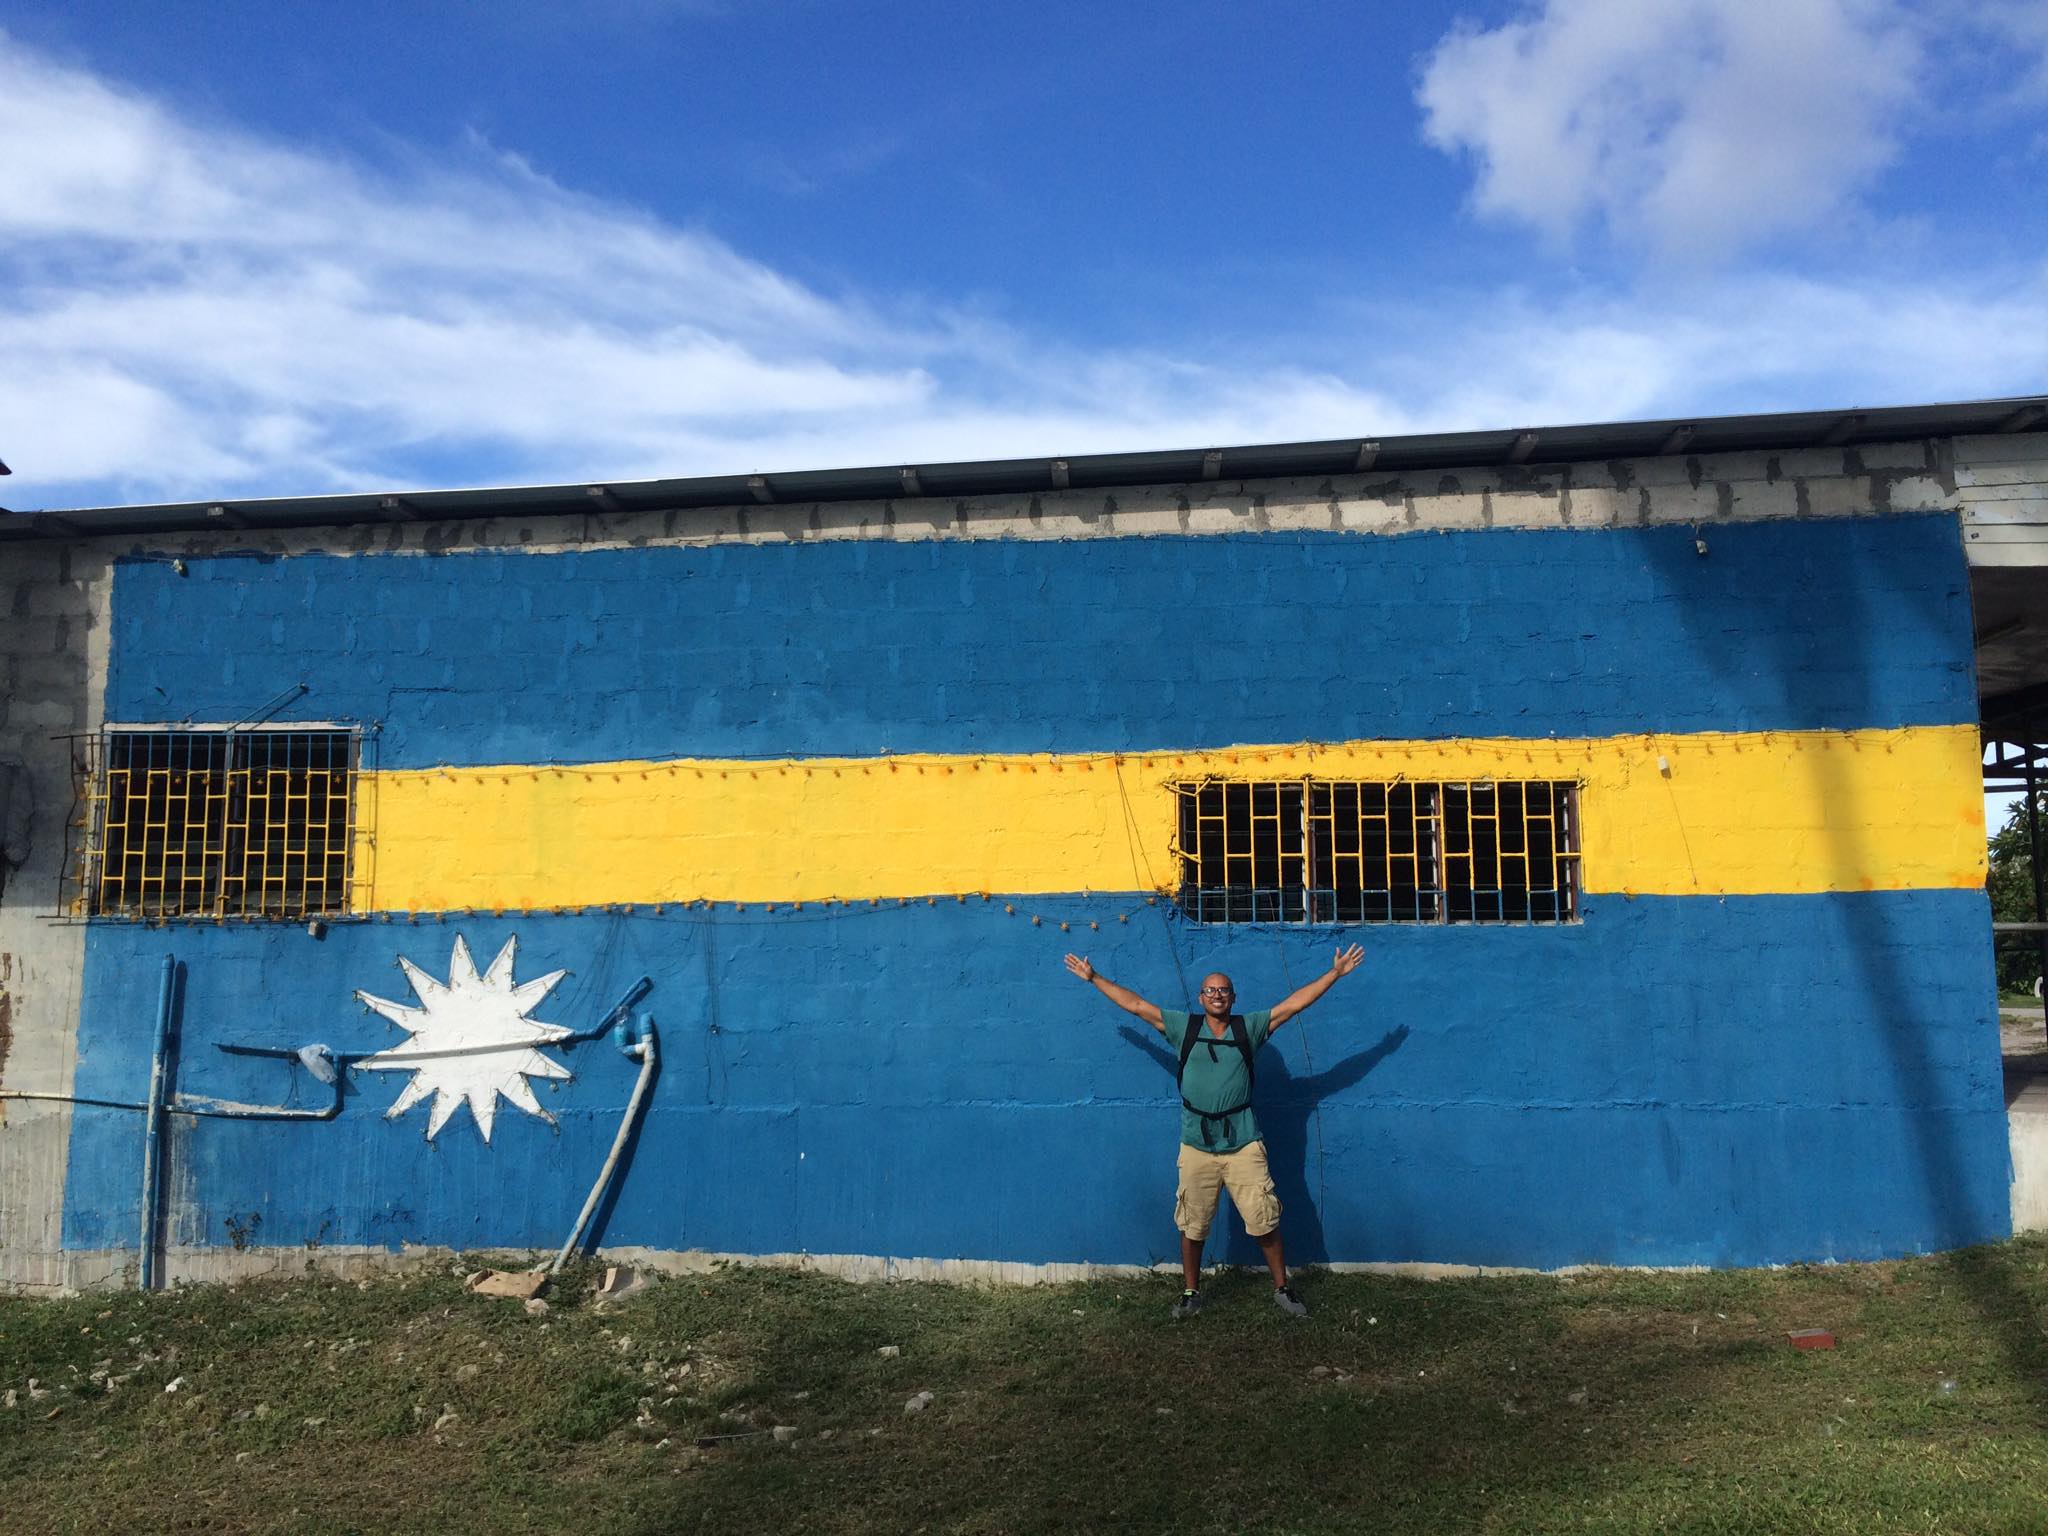 A proud moment captured as the I stand in front of a vibrant mural featuring the flag of Nauru on Nauru Island. The mural, depicting the Nauruan flag with its distinctive blue background and a white star in the center, stands as a symbol of national pride. The image reflects the my respect for the island nation's heritage and identity.